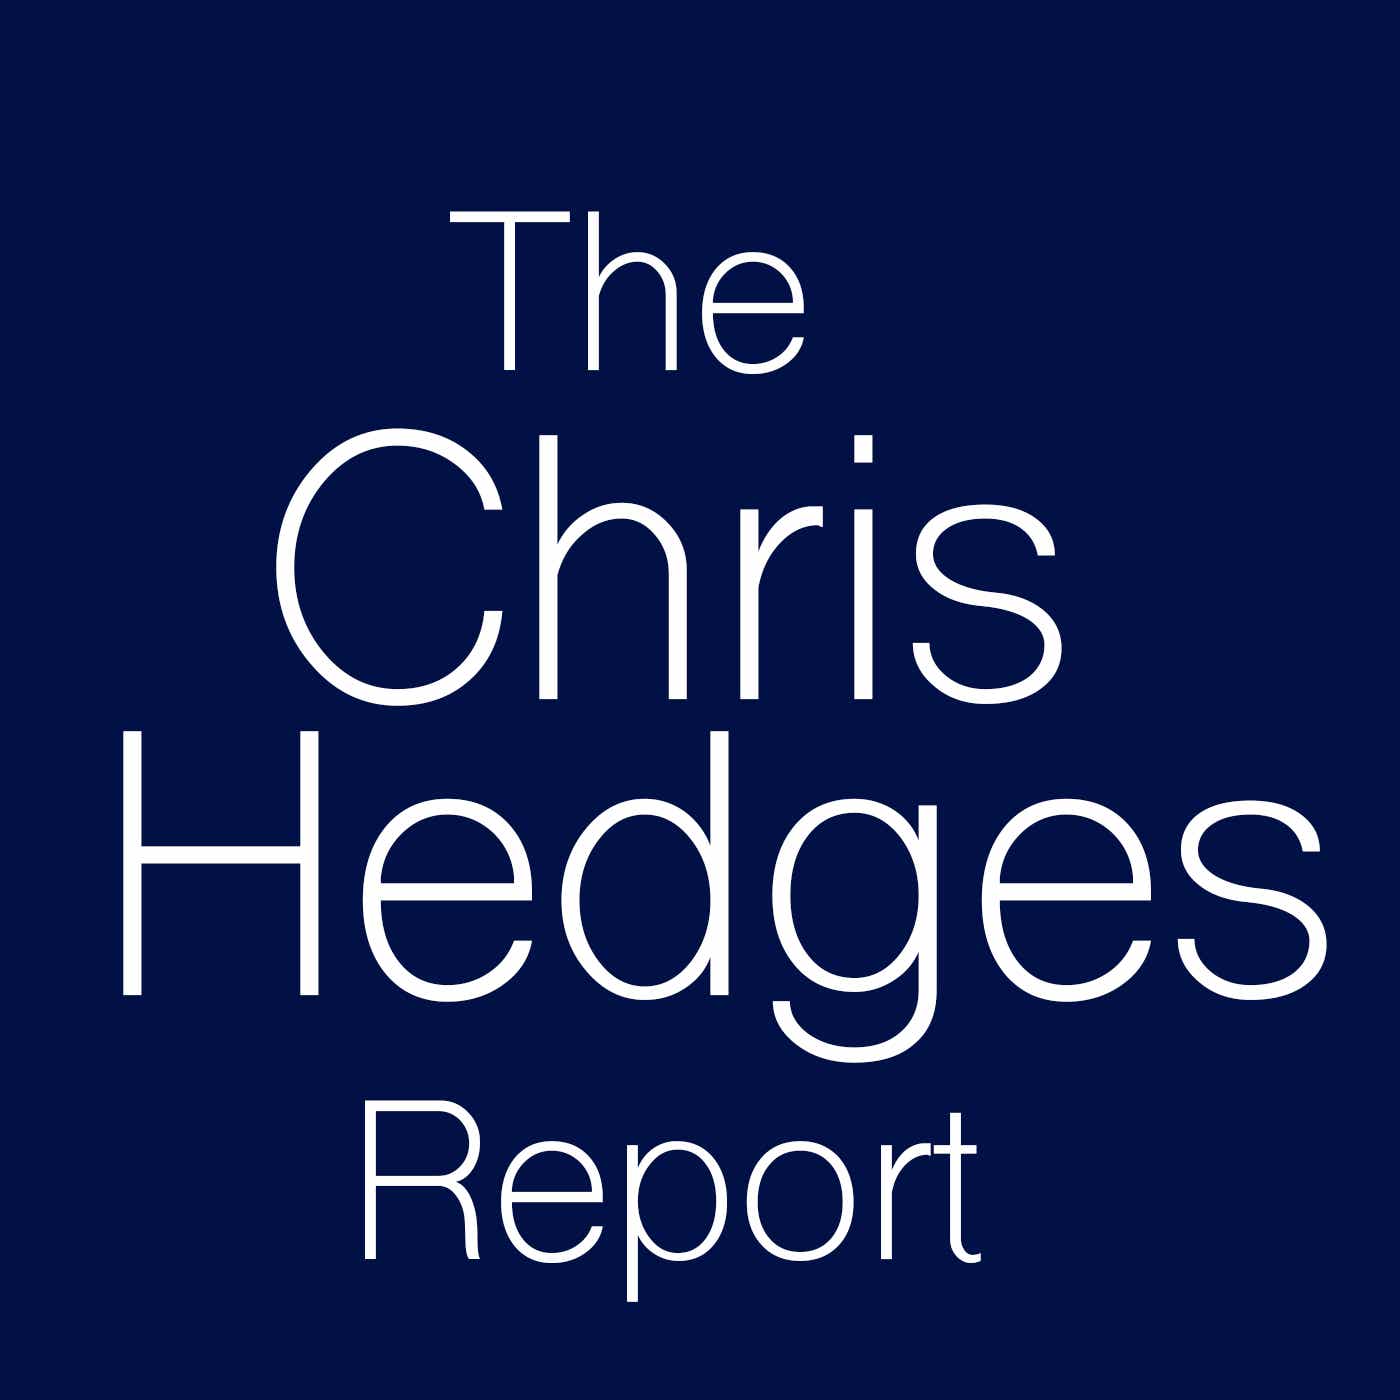 The Chris Hedges Report Podcast (private feed for mrkelr108@gmail.com)